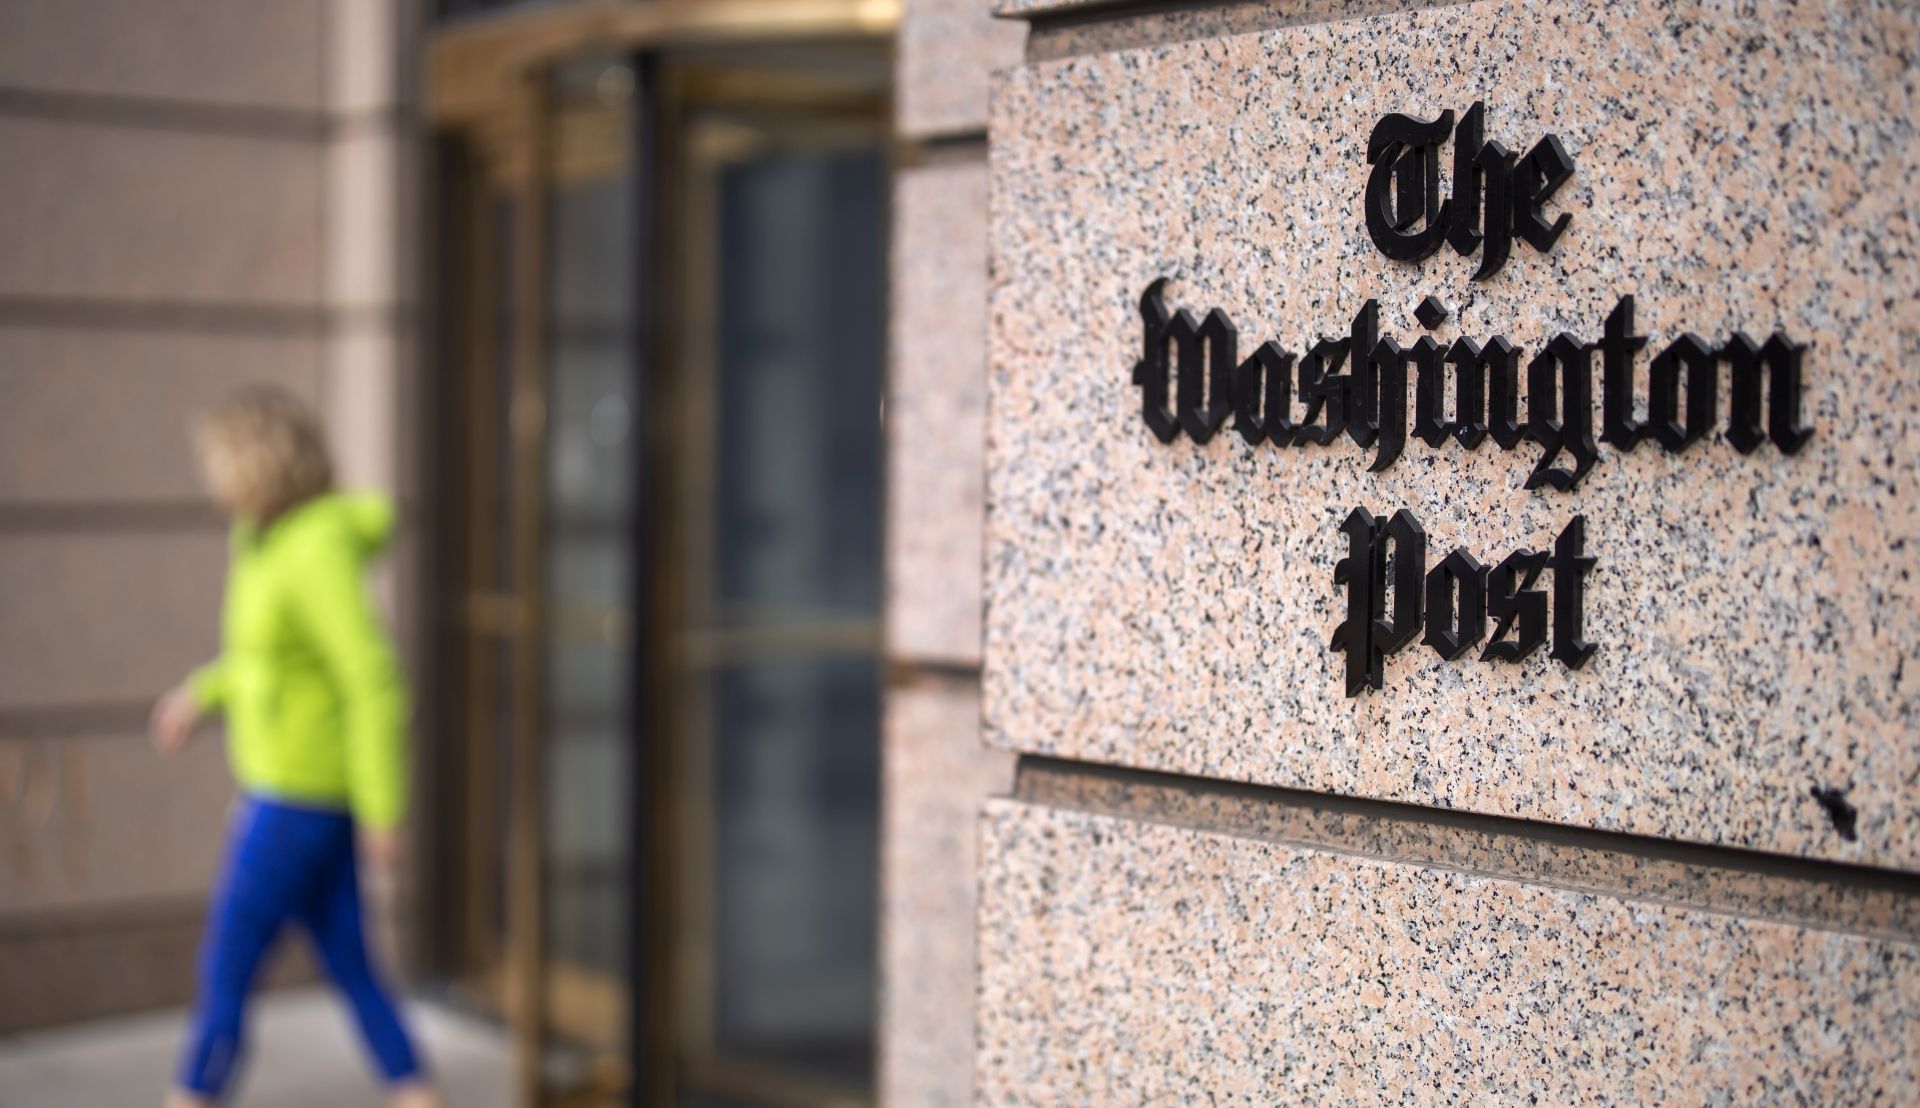 epa08088370 The entrance to 'The Washington Post' newspaper in Washington, DC, USA, 23 December 2019. According to Saudi Arabian state media reports on 23 December 2019, Saudi Arabia's public prosecutor said a total of five suspects have been sentenced to death by a court in Riyadh in relation to the murder of Saudi journalist and Washington Post columnist Jamal Khashoggi. Khashoggi was killed while visiting the Saudi consulate in Istanbul, Turkey on 02 October 2018 to do a routine paperwork. Three others of a total of 11 suspects were given jail sentences totaling 24 years.  EPA/ERIK S. LESSER